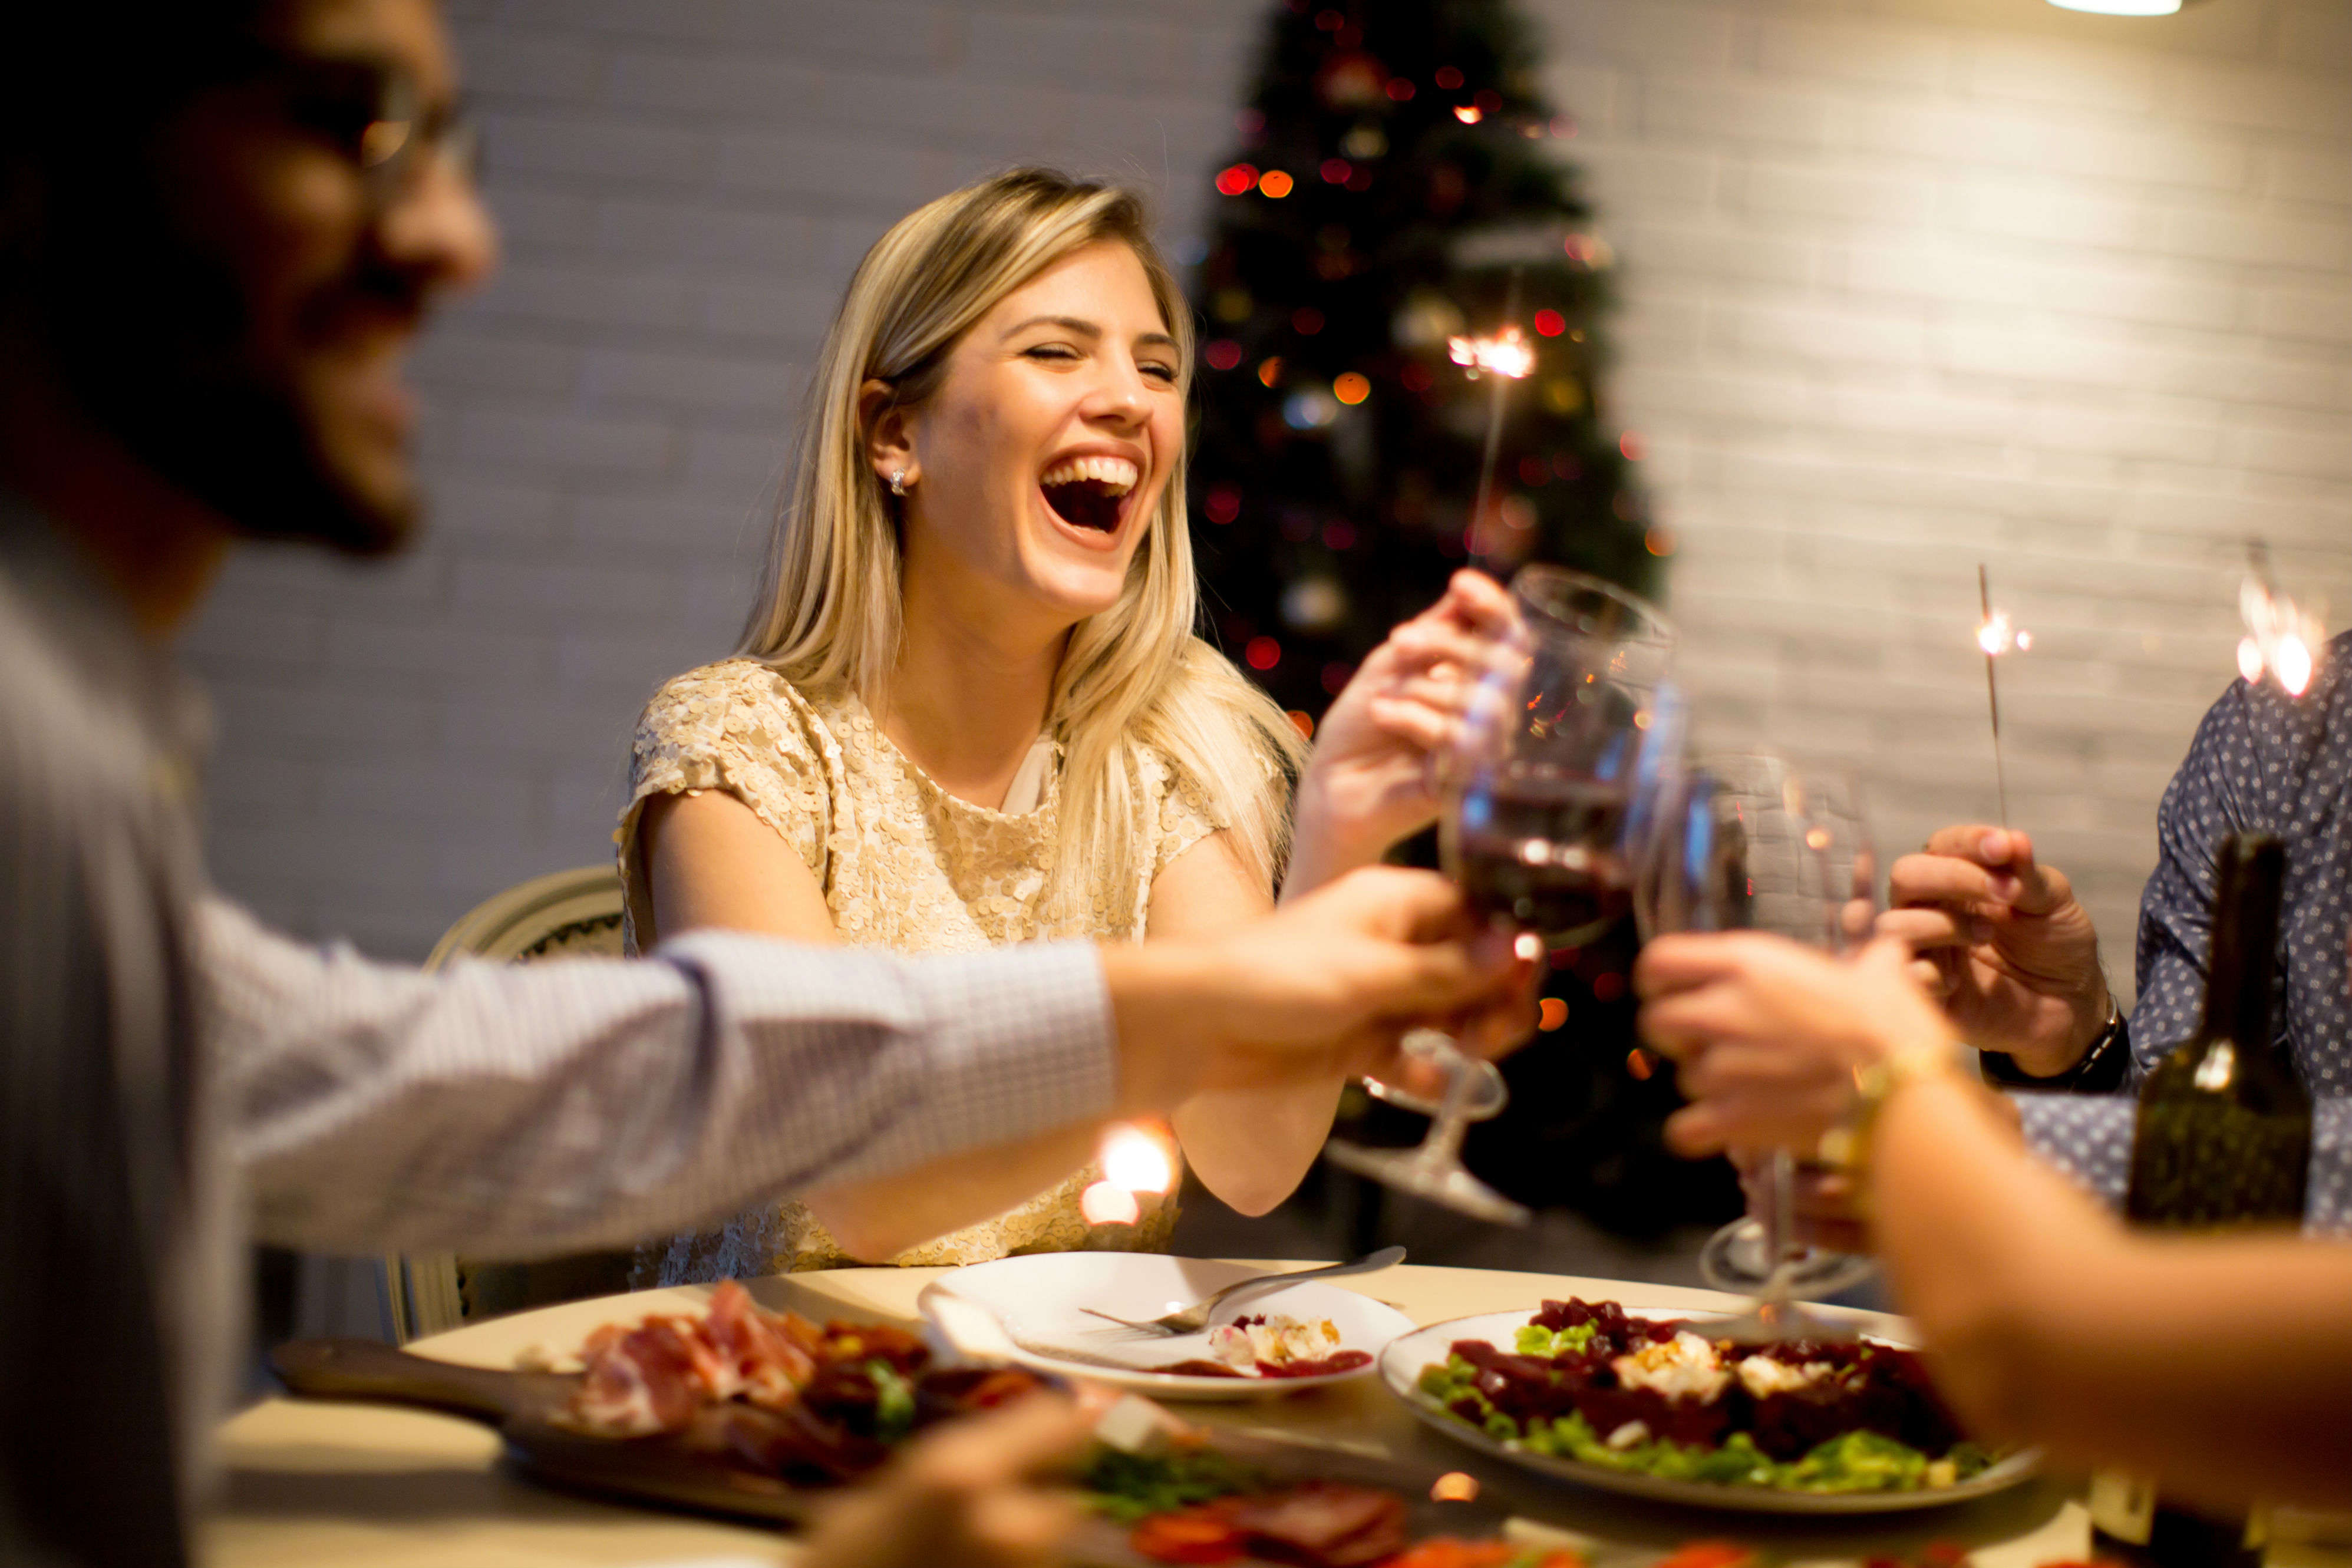 Christmas party in Goa for party lovers | Times of India Travel